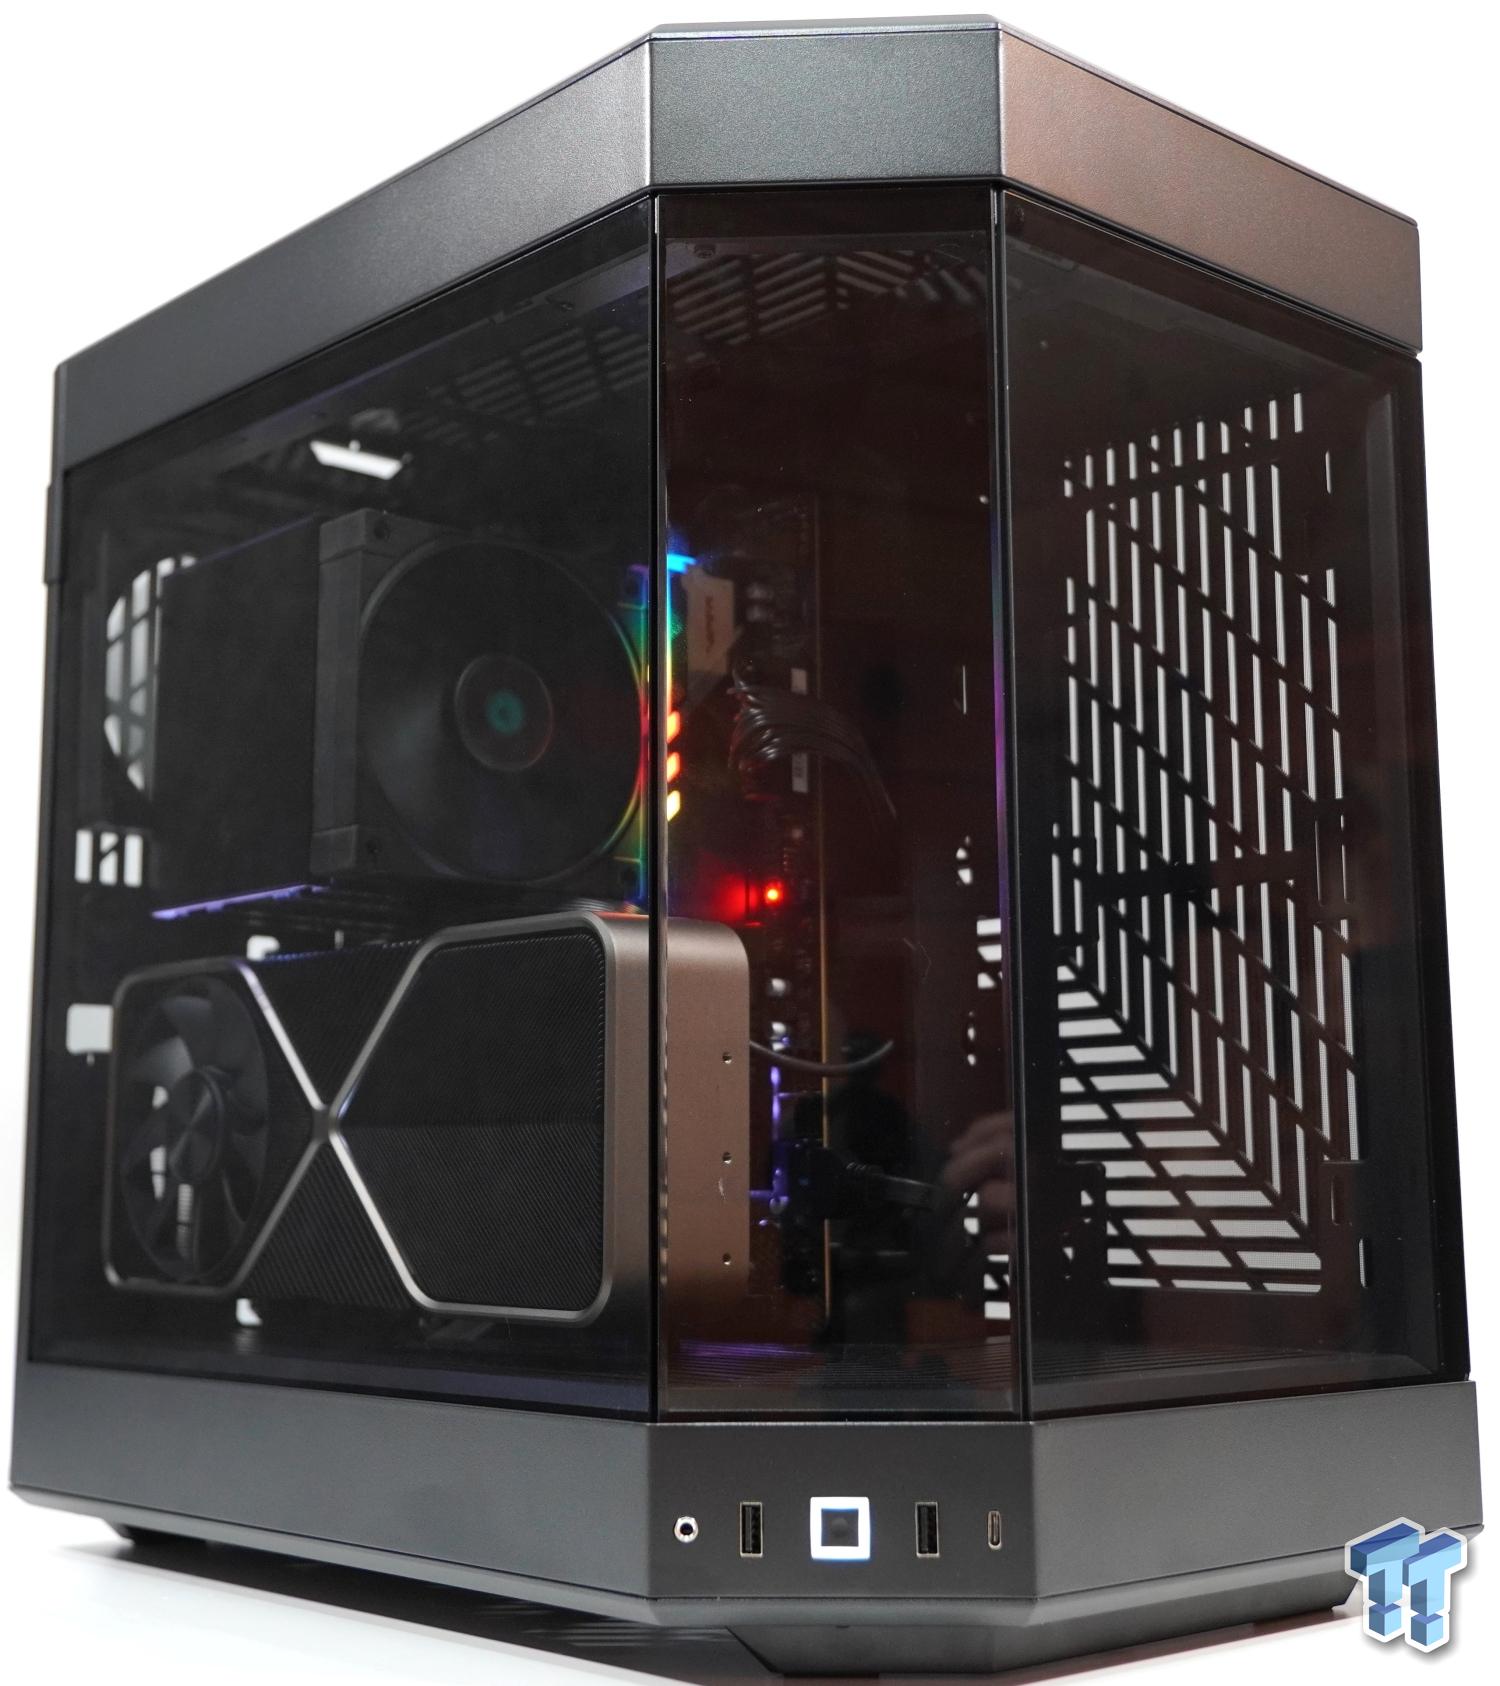 Meet the Y60: Our ATX Case Gives Your GPU Center Stage